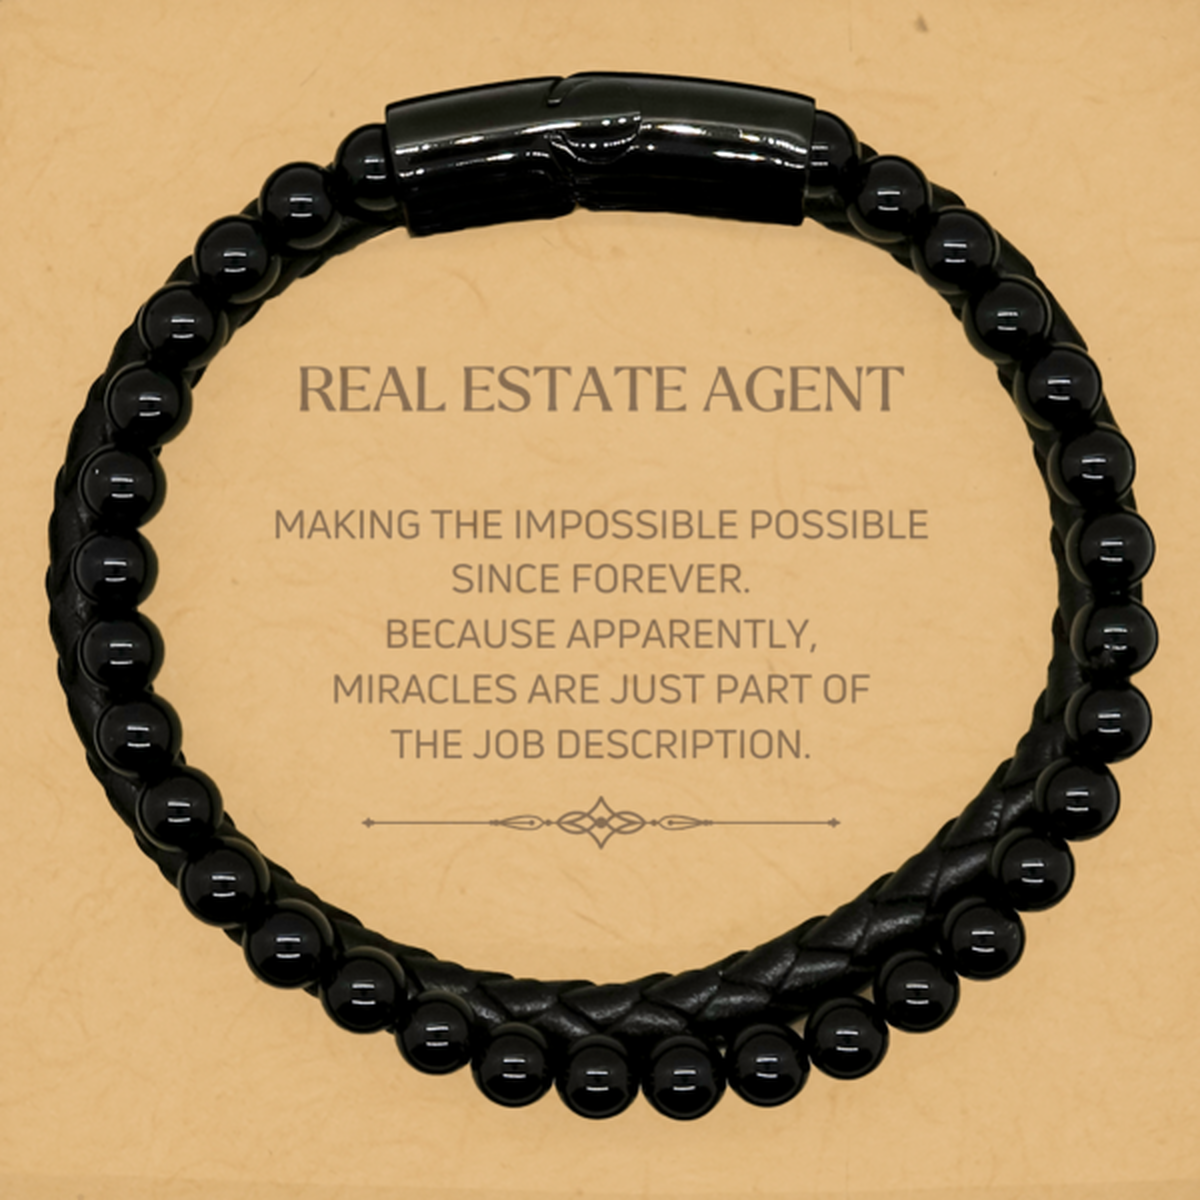 Funny Real Estate Agent Gifts, Miracles are just part of the job description, Inspirational Birthday Stone Leather Bracelets For Real Estate Agent, Men, Women, Coworkers, Friends, Boss